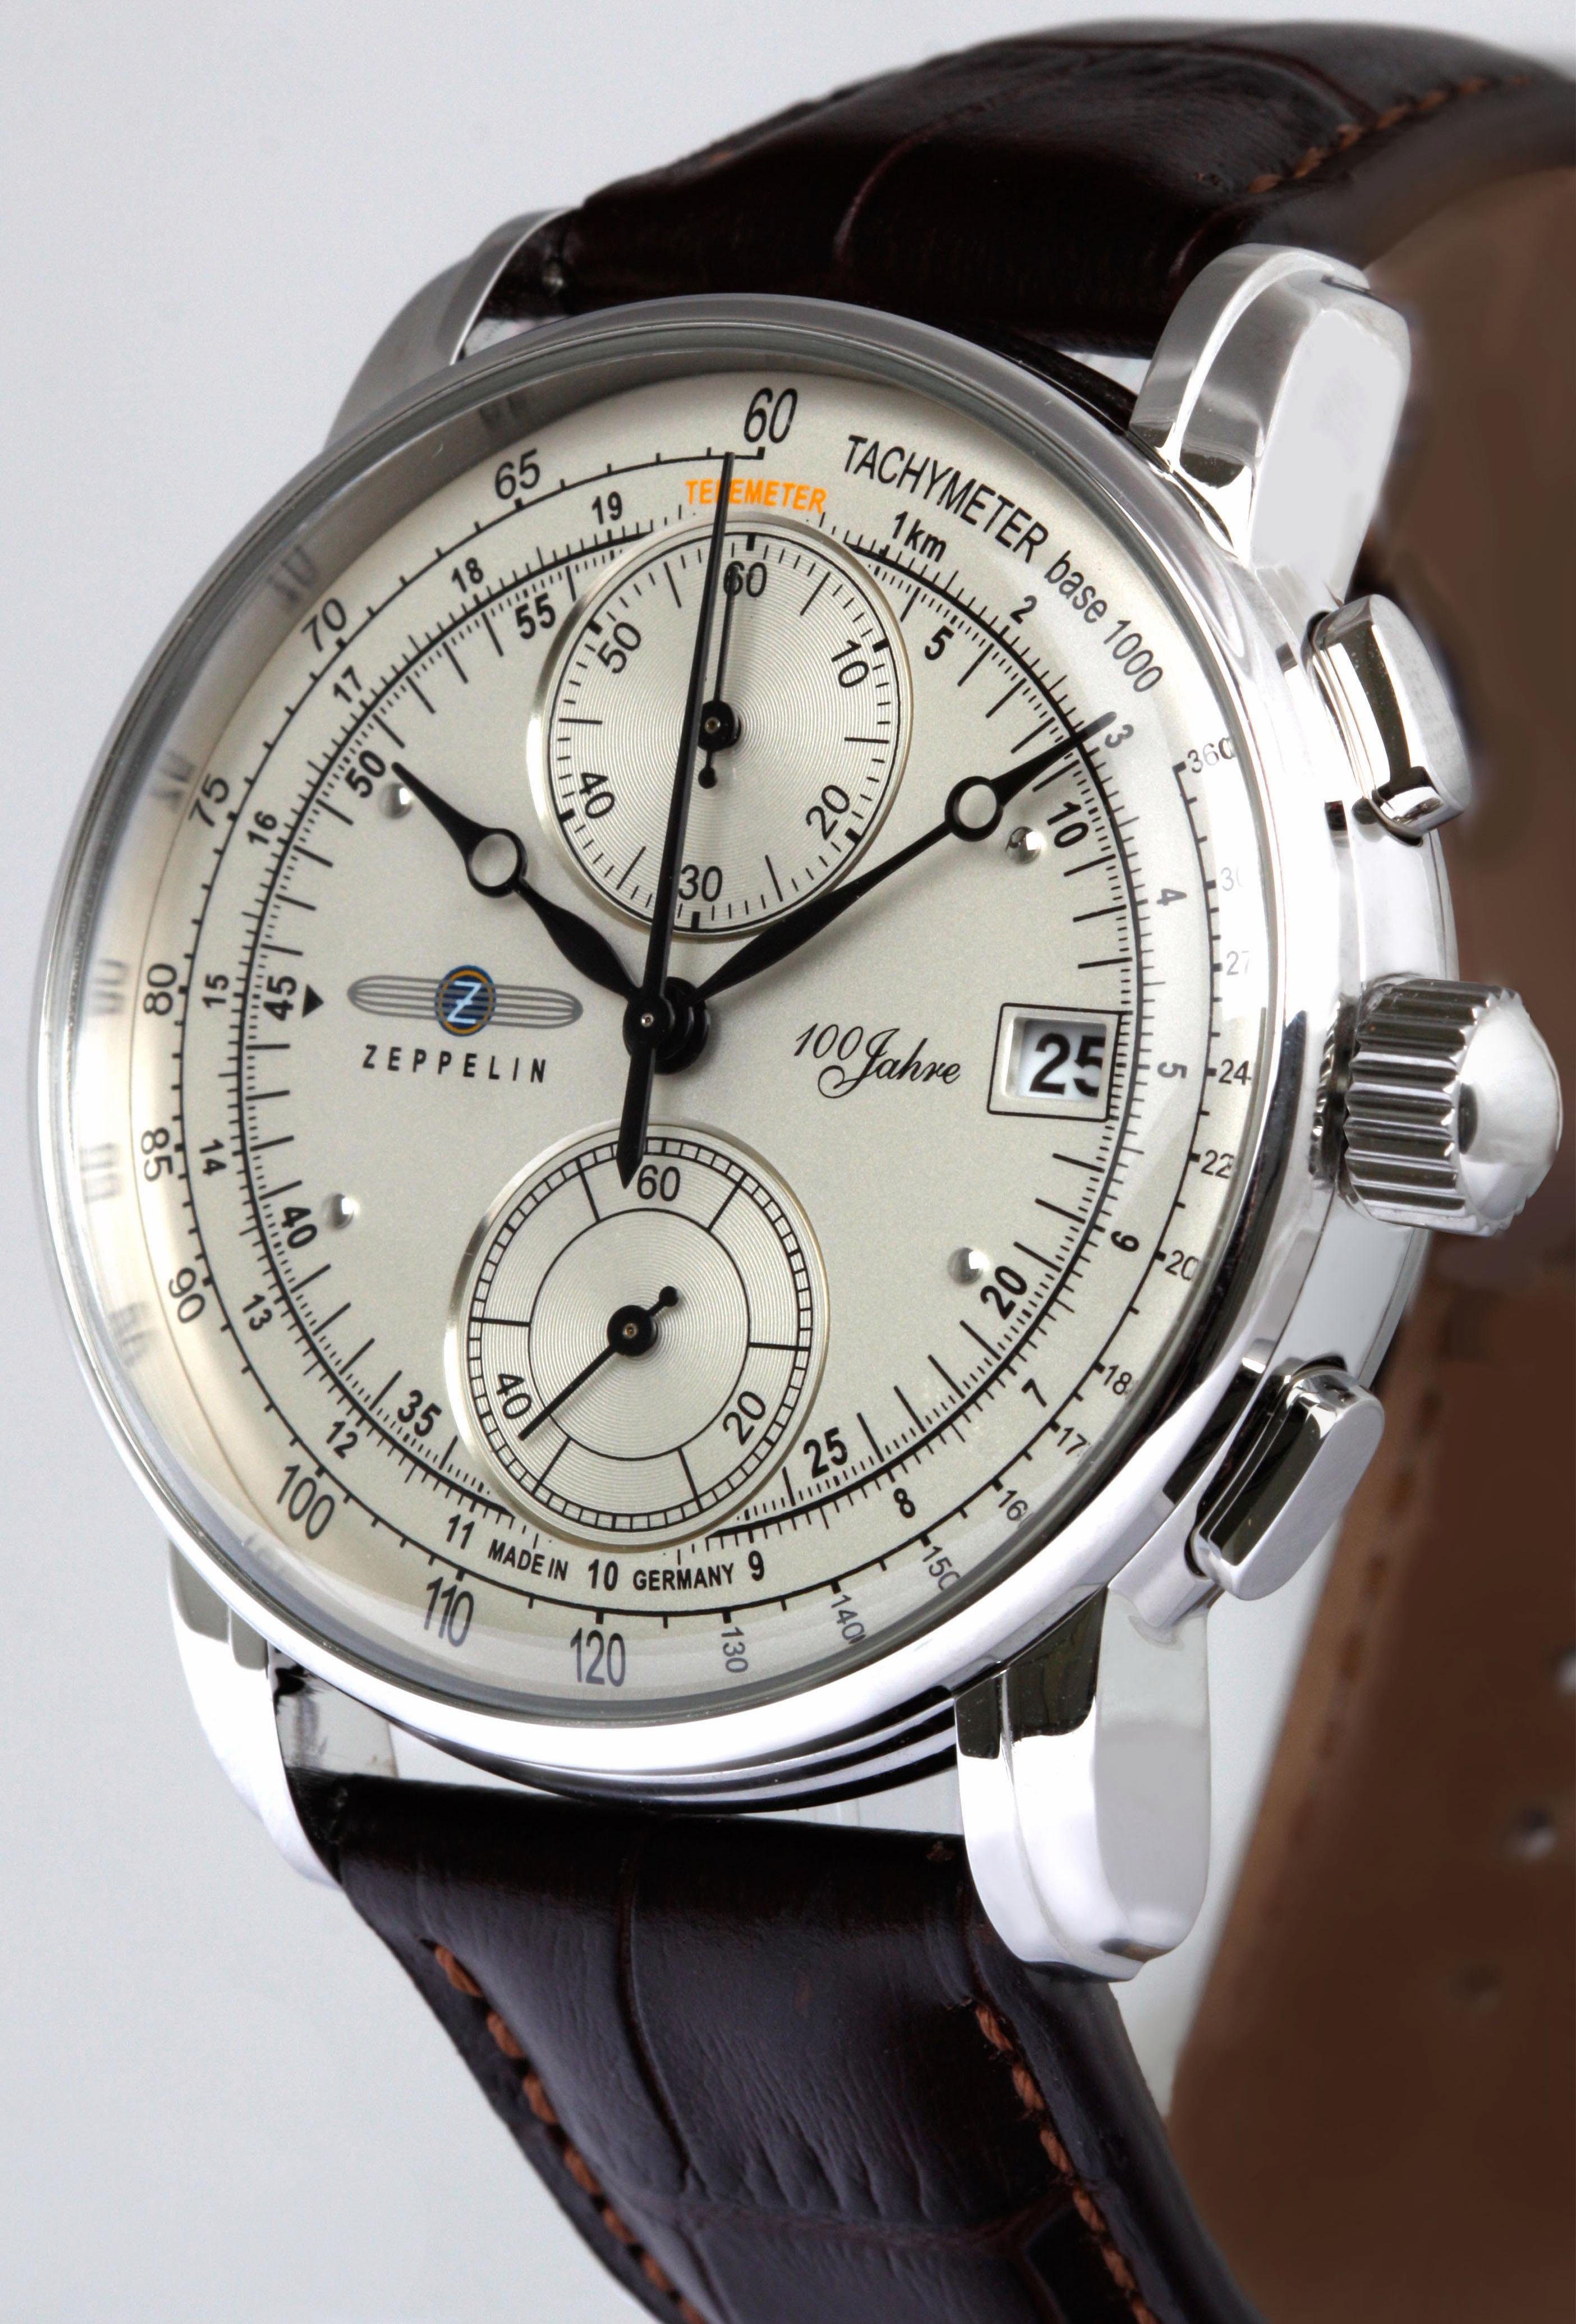 ZEPPELIN Chronograph 100 made Jahre Germany Zeppelin, in 86701